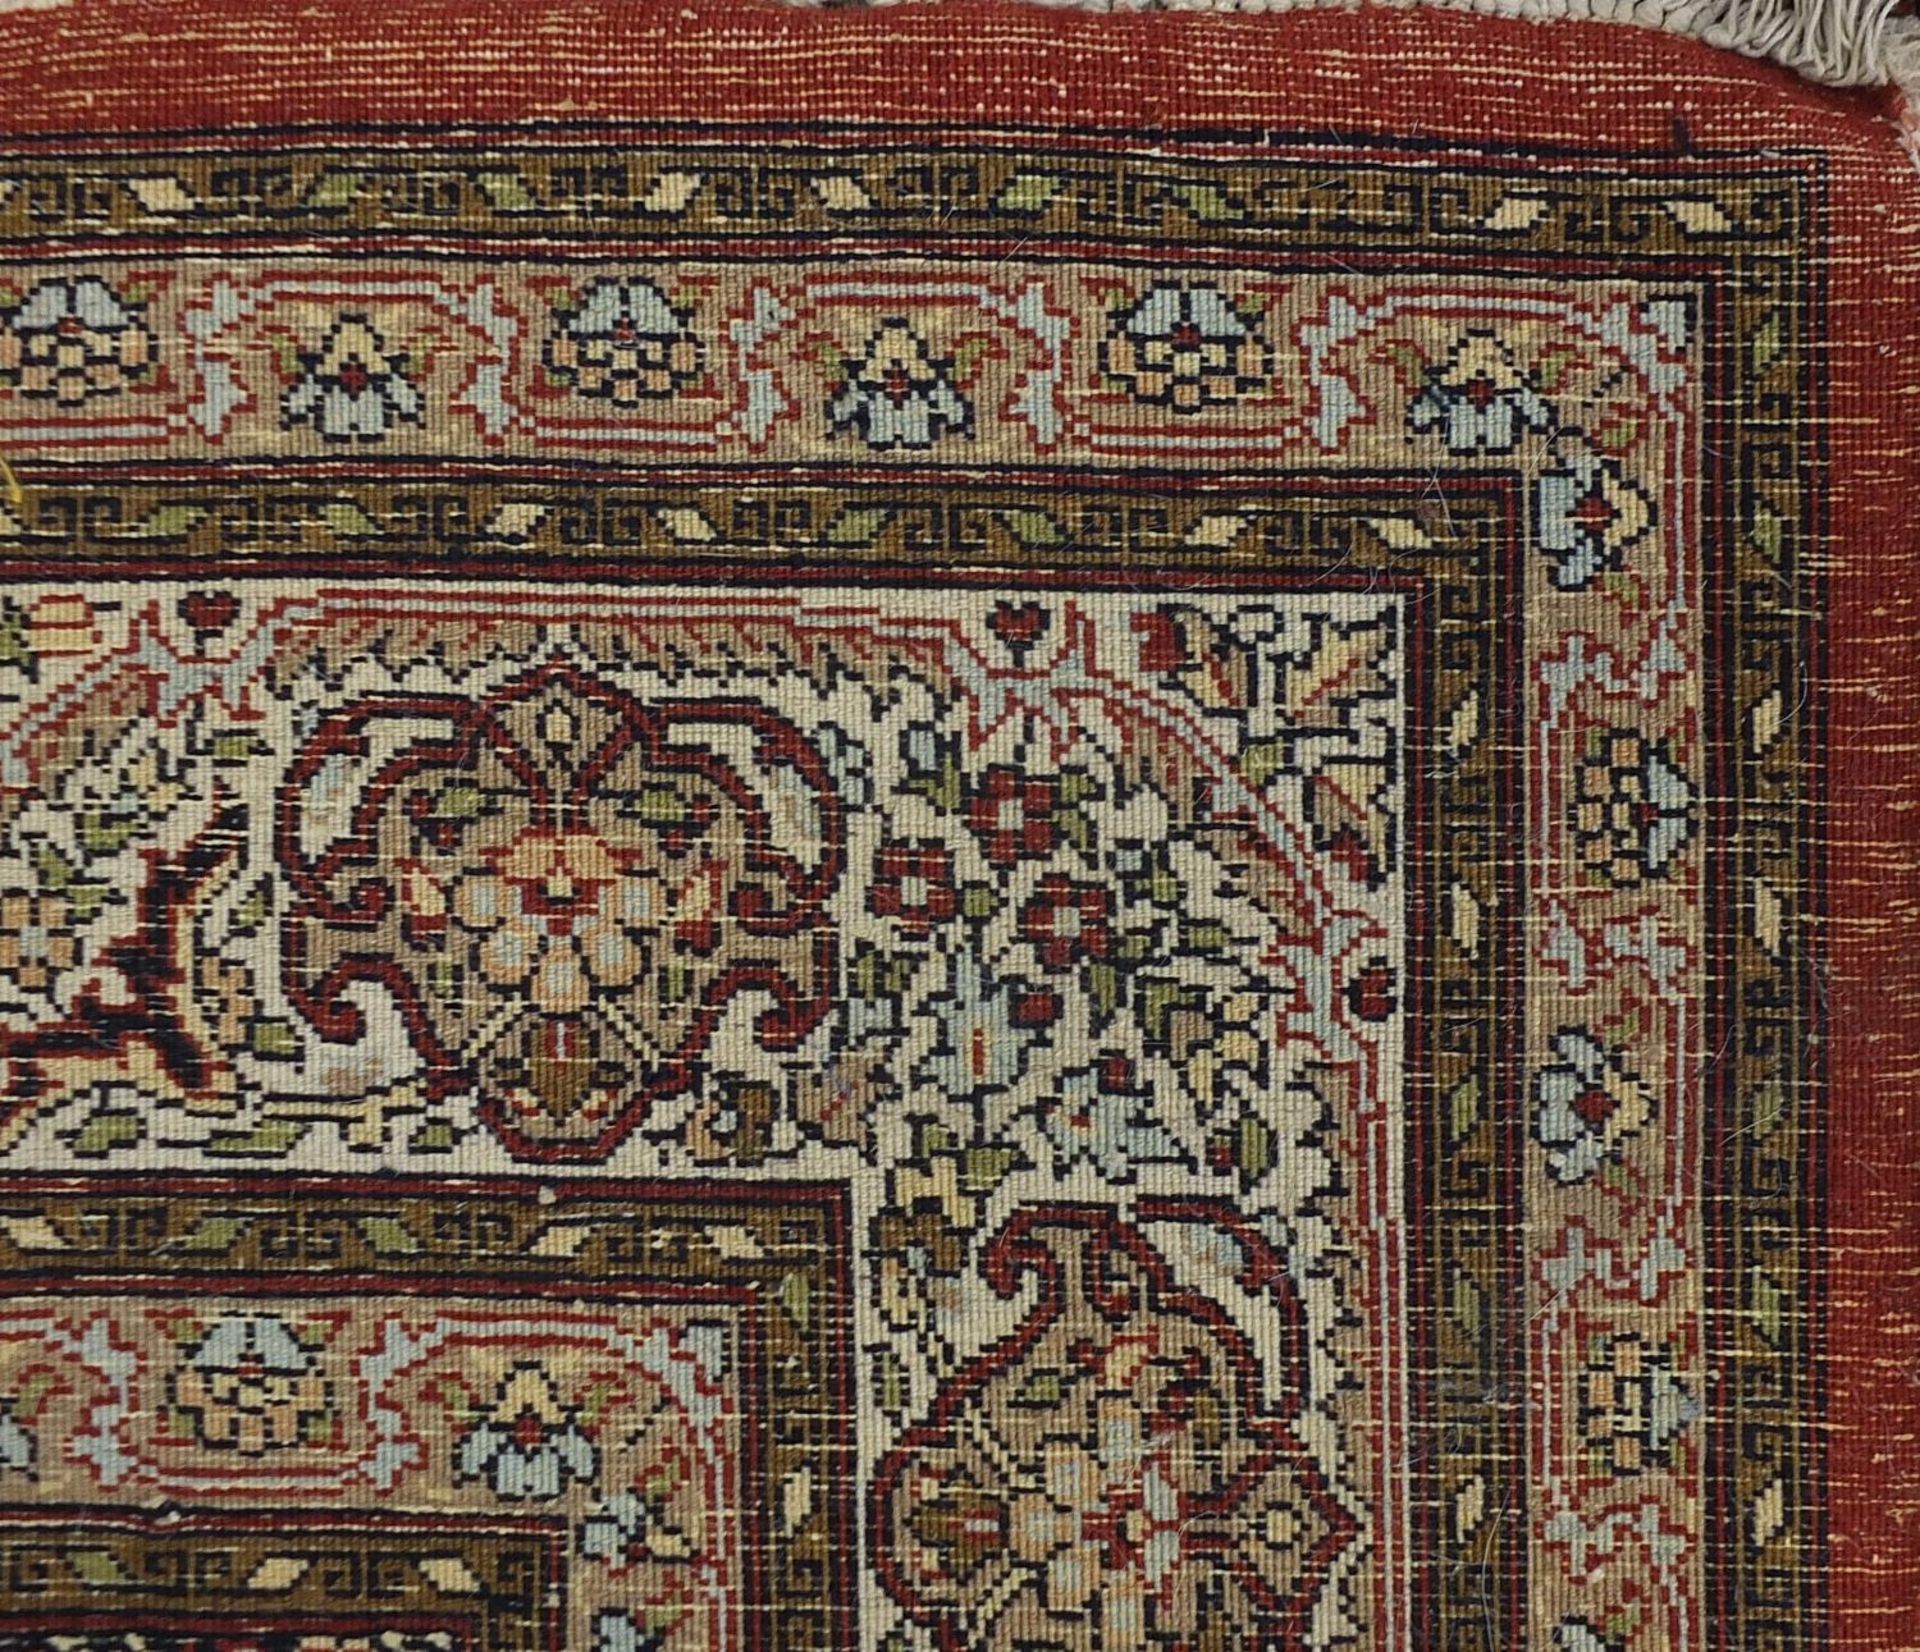 Rectangular Persian rug having an all over floral design with traditional medallion, 224cm x - Image 4 of 4